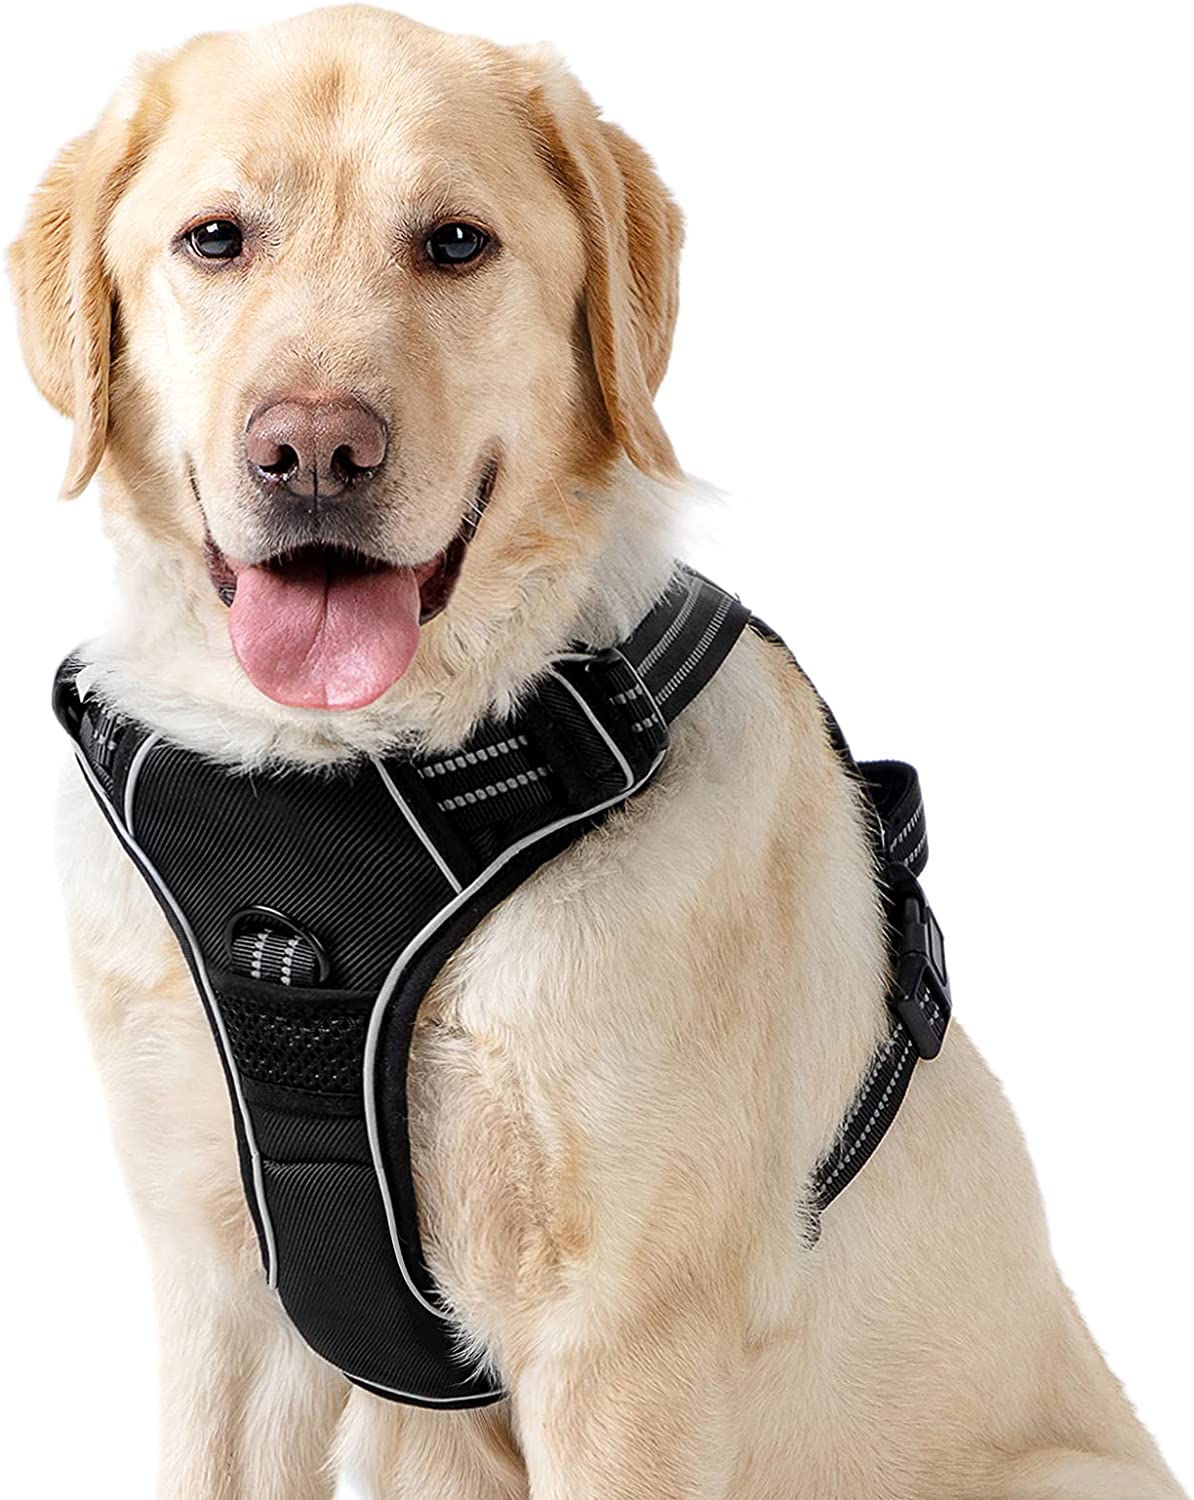 Dog Vest Harness Reflective Adjustable with Easy Control Handle From $8.49~$15.59 + FS with PRIME